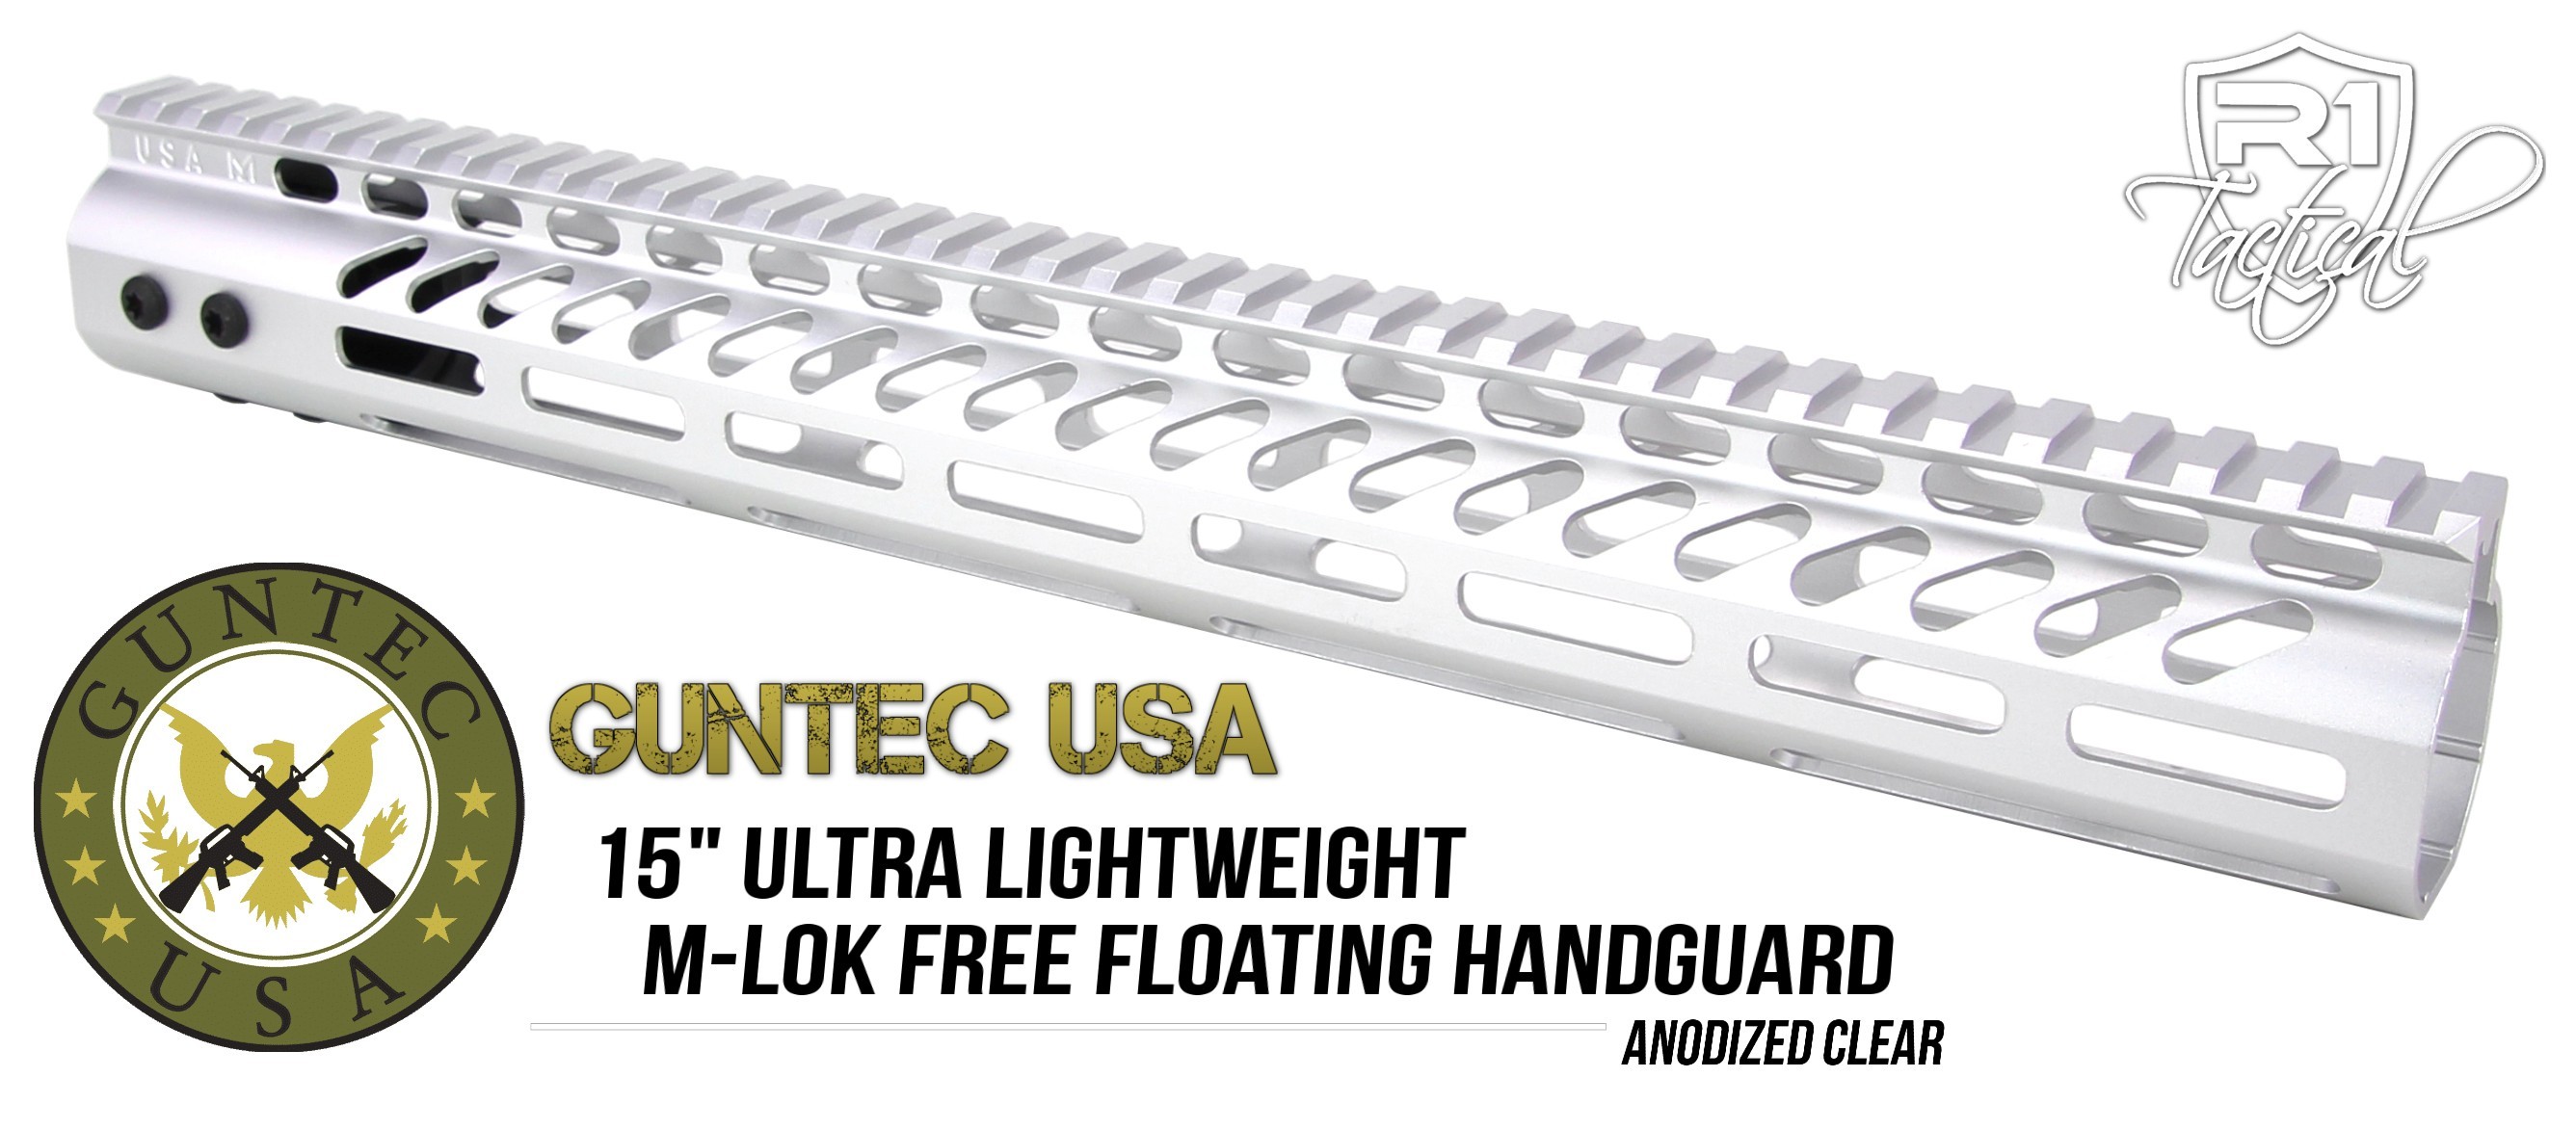 Guntec USA 15 inch Ultra Lightweight Thin M-LOK System Free Floating Handguard Monolithic Top Rail - Anodized Clear | Redcon1 Tactical